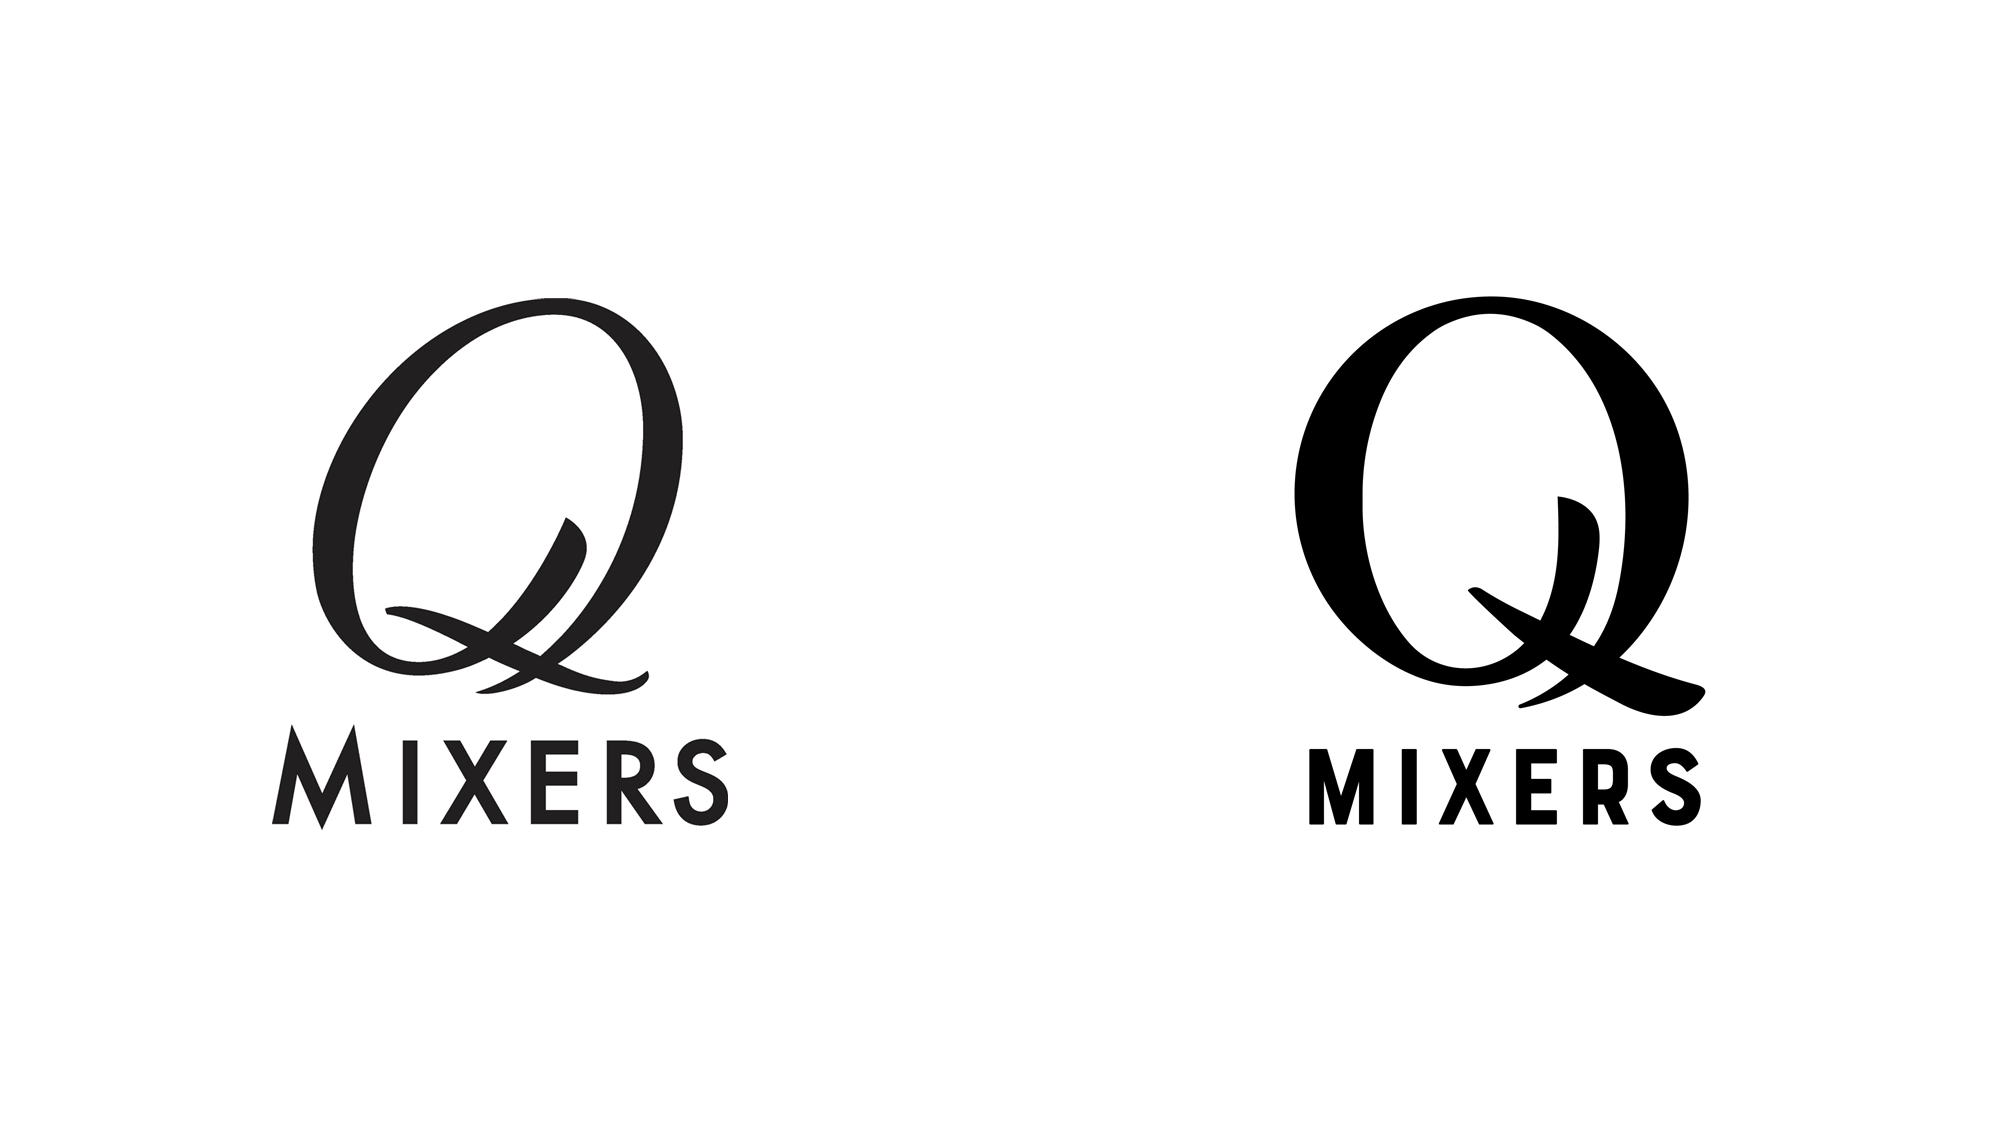 Brand New: New Logo and Packaging for Q Mixers